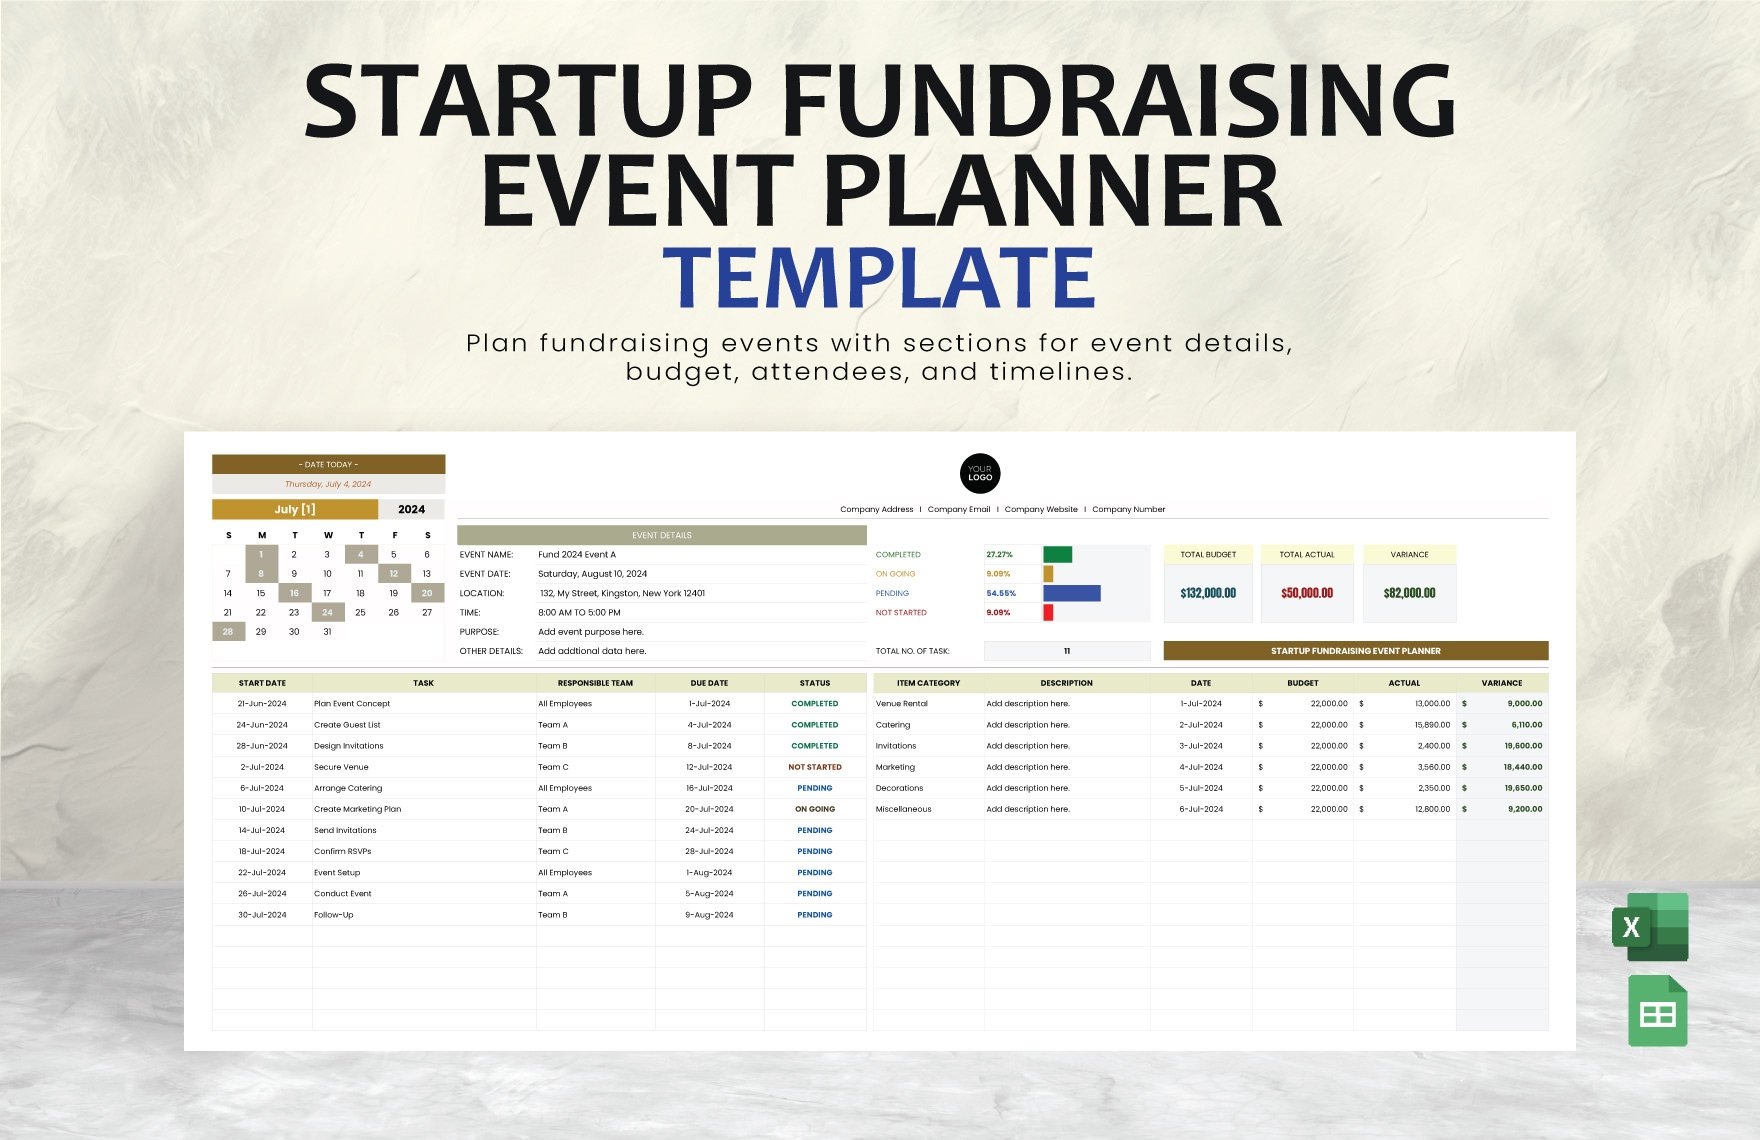 Startup Fundraising Event Planner Template in Excel, Google Sheets